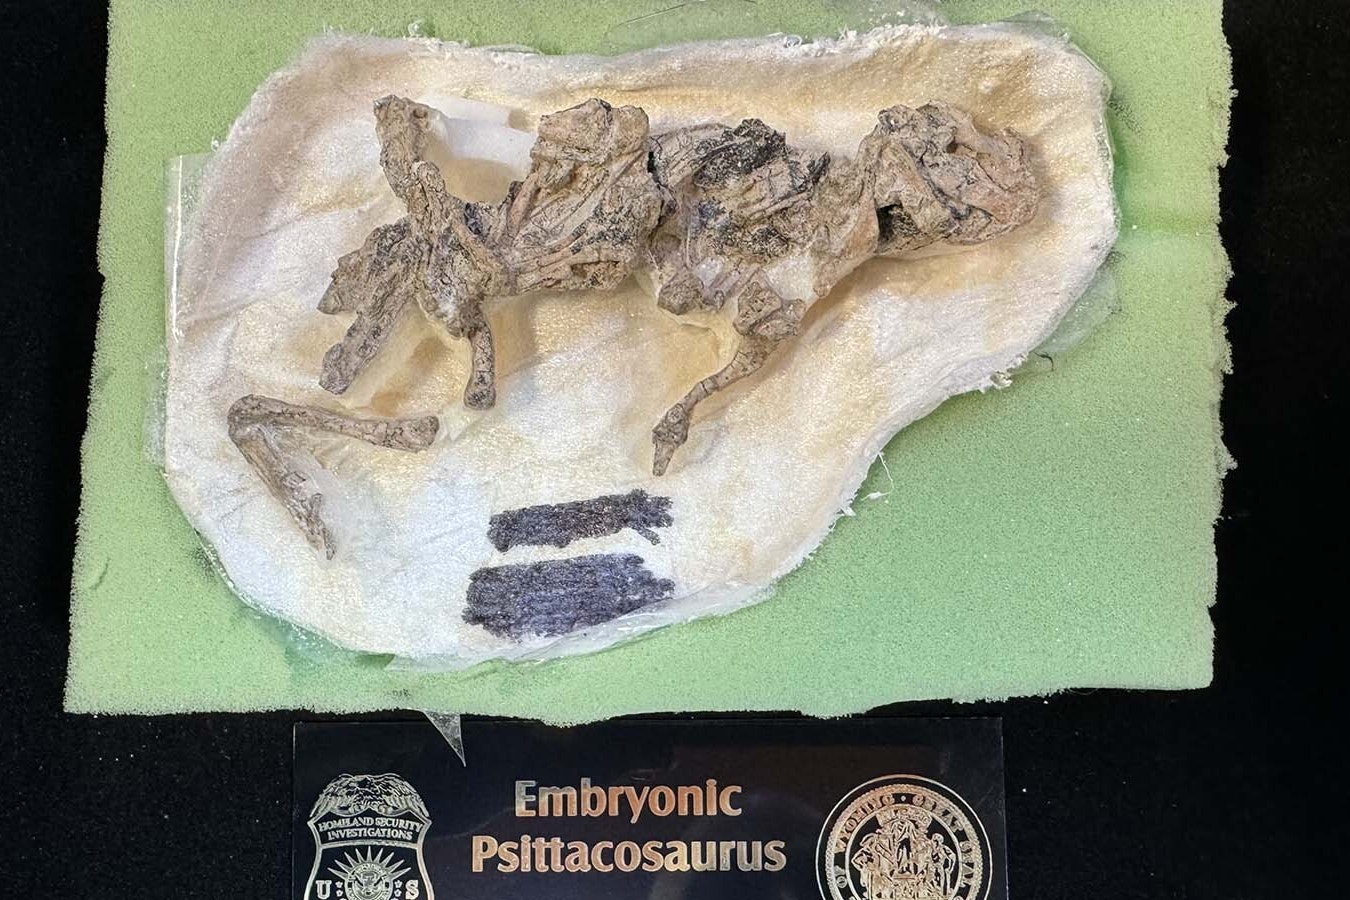 The tiny skeleton of an embryonic Psittacosaurus. This fossil was excavated in Mongolia or China, but its exact origin is unknown. It will now be part of the permanent fossil collection at the Tate Geological Museum in Casper.